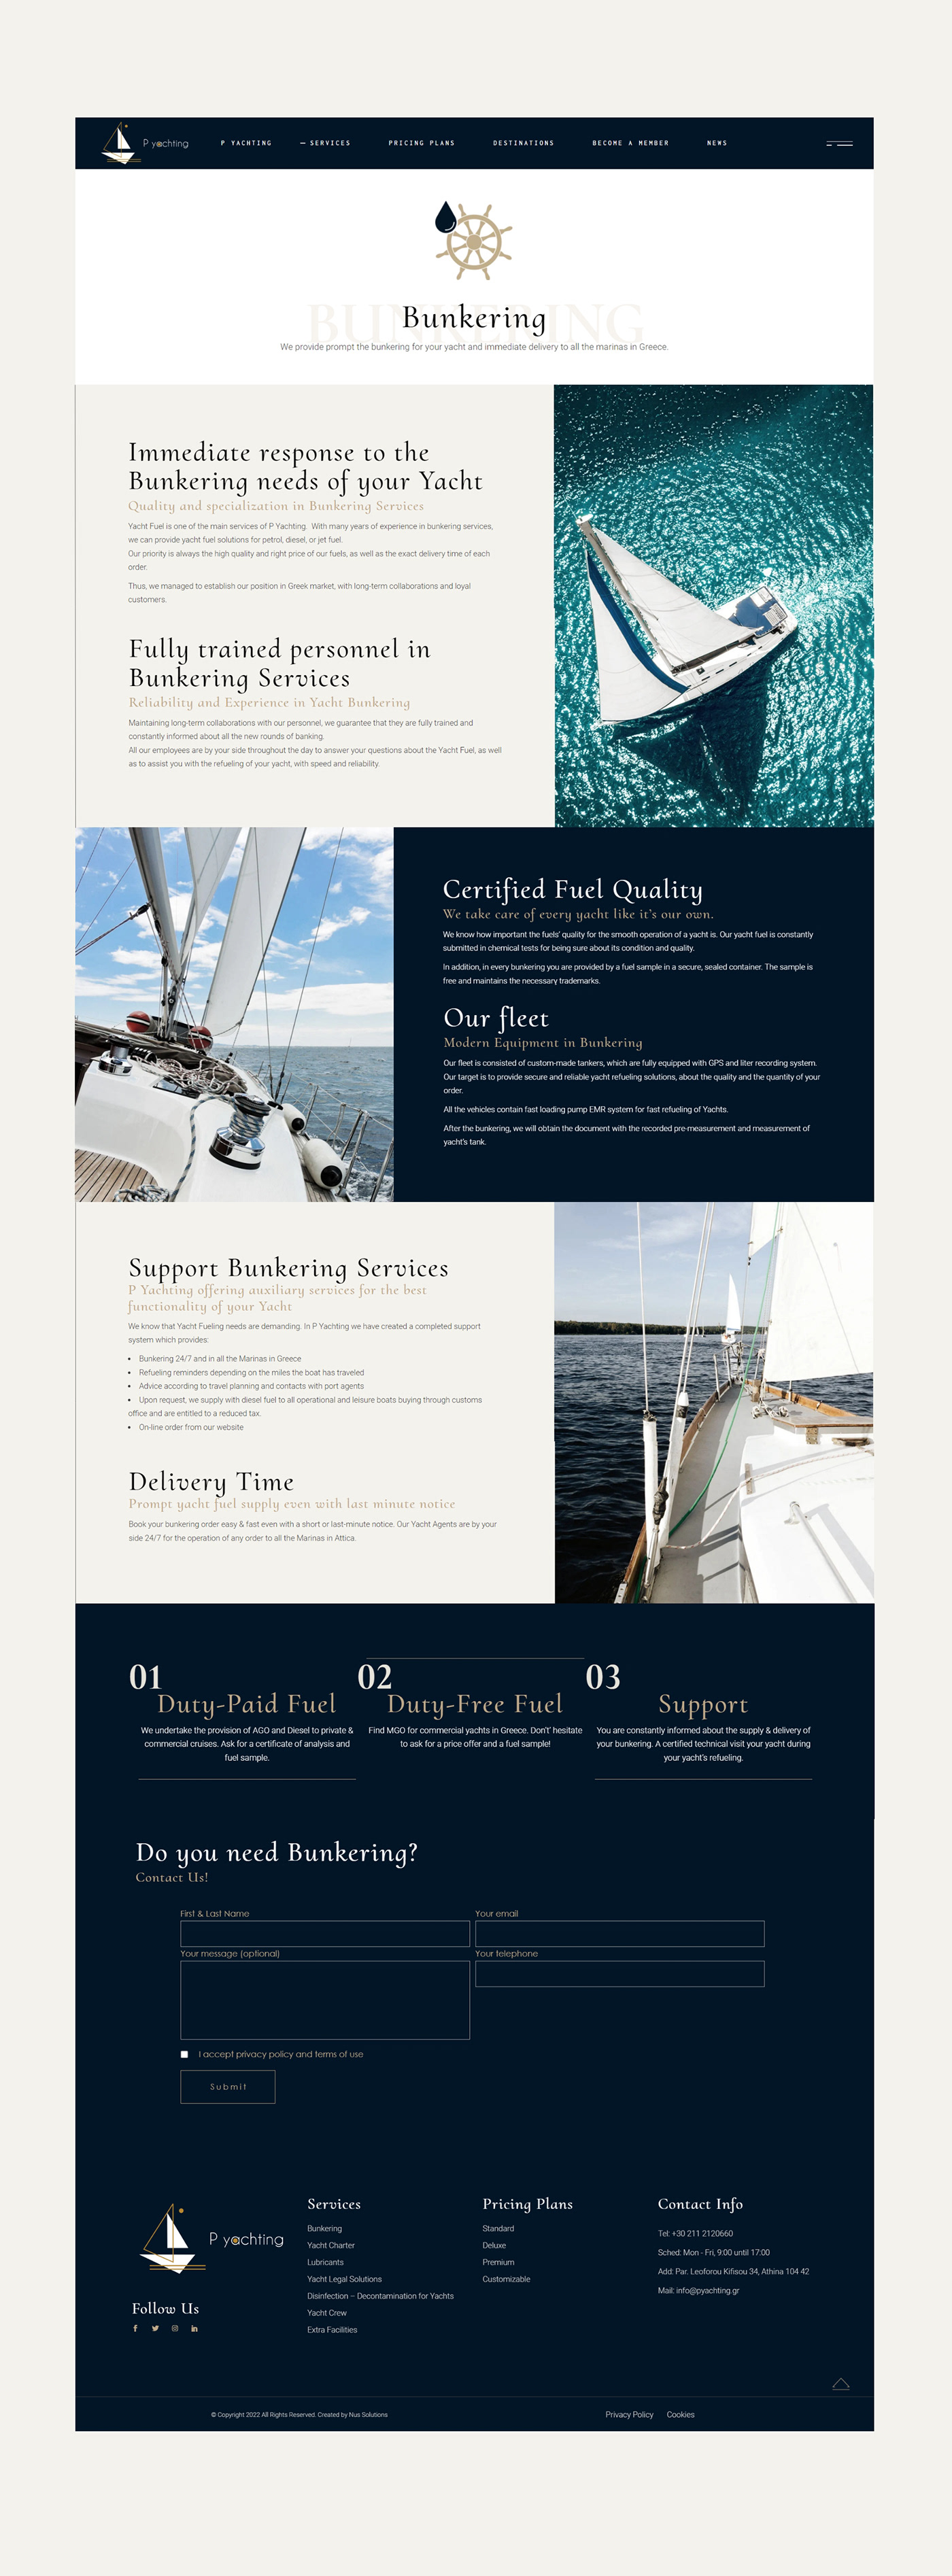 Landing page of a yachting company website